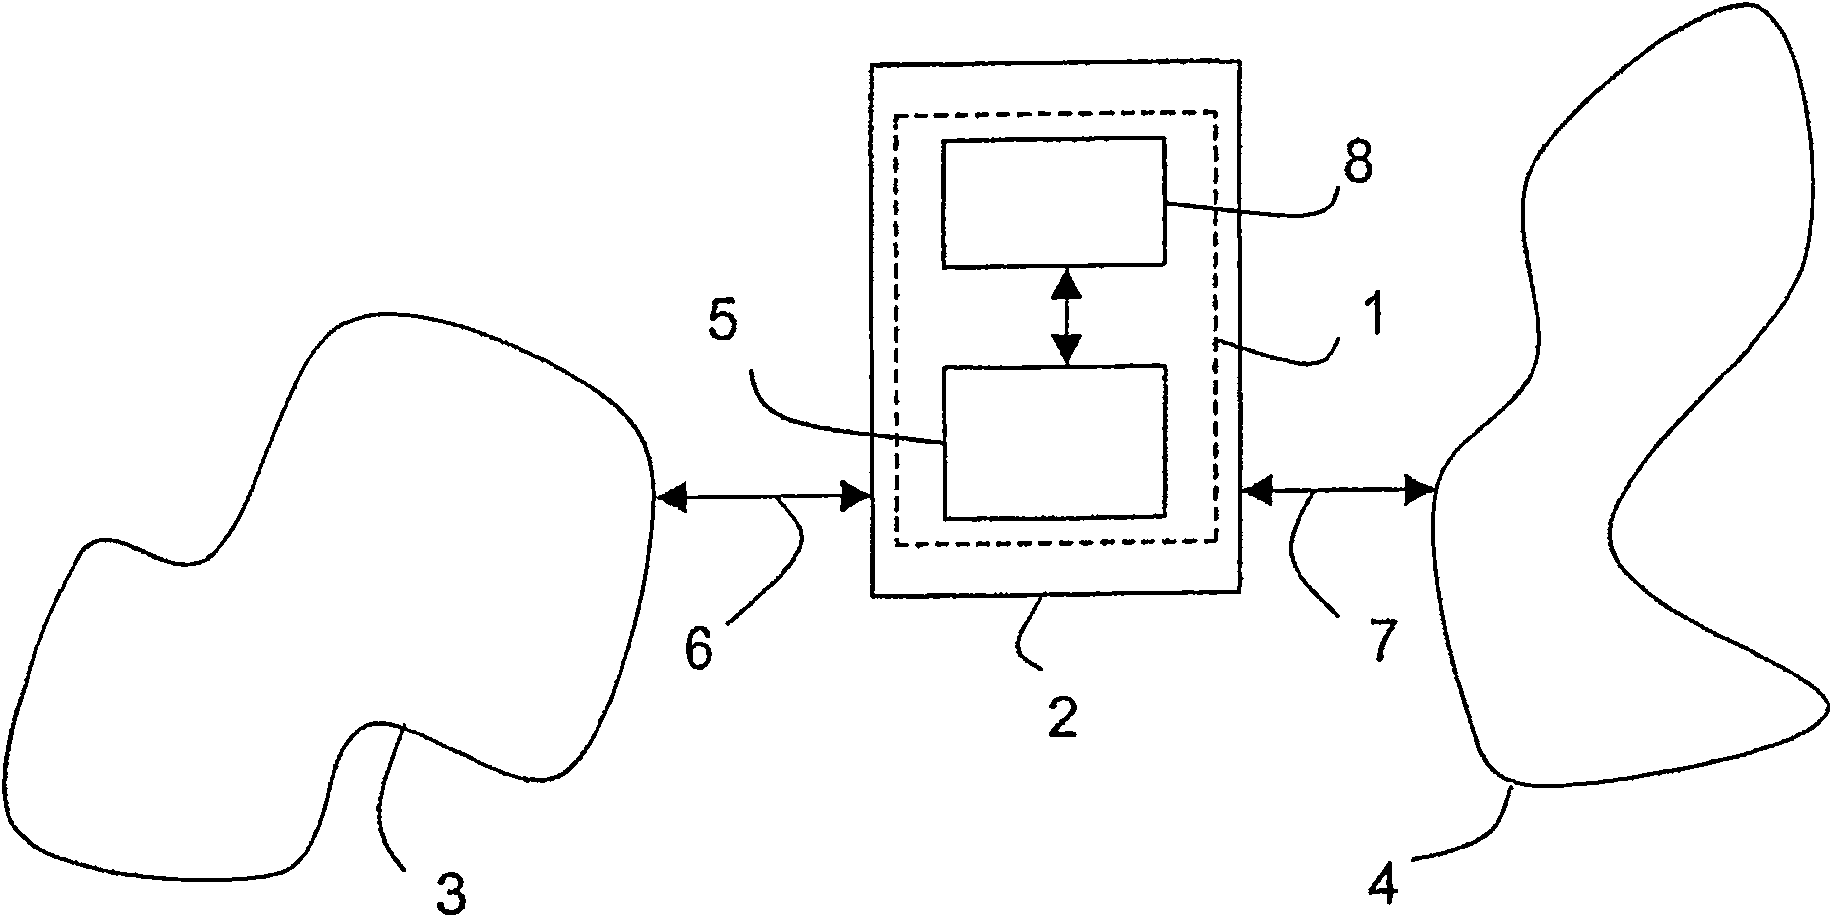 Device for managing data filters